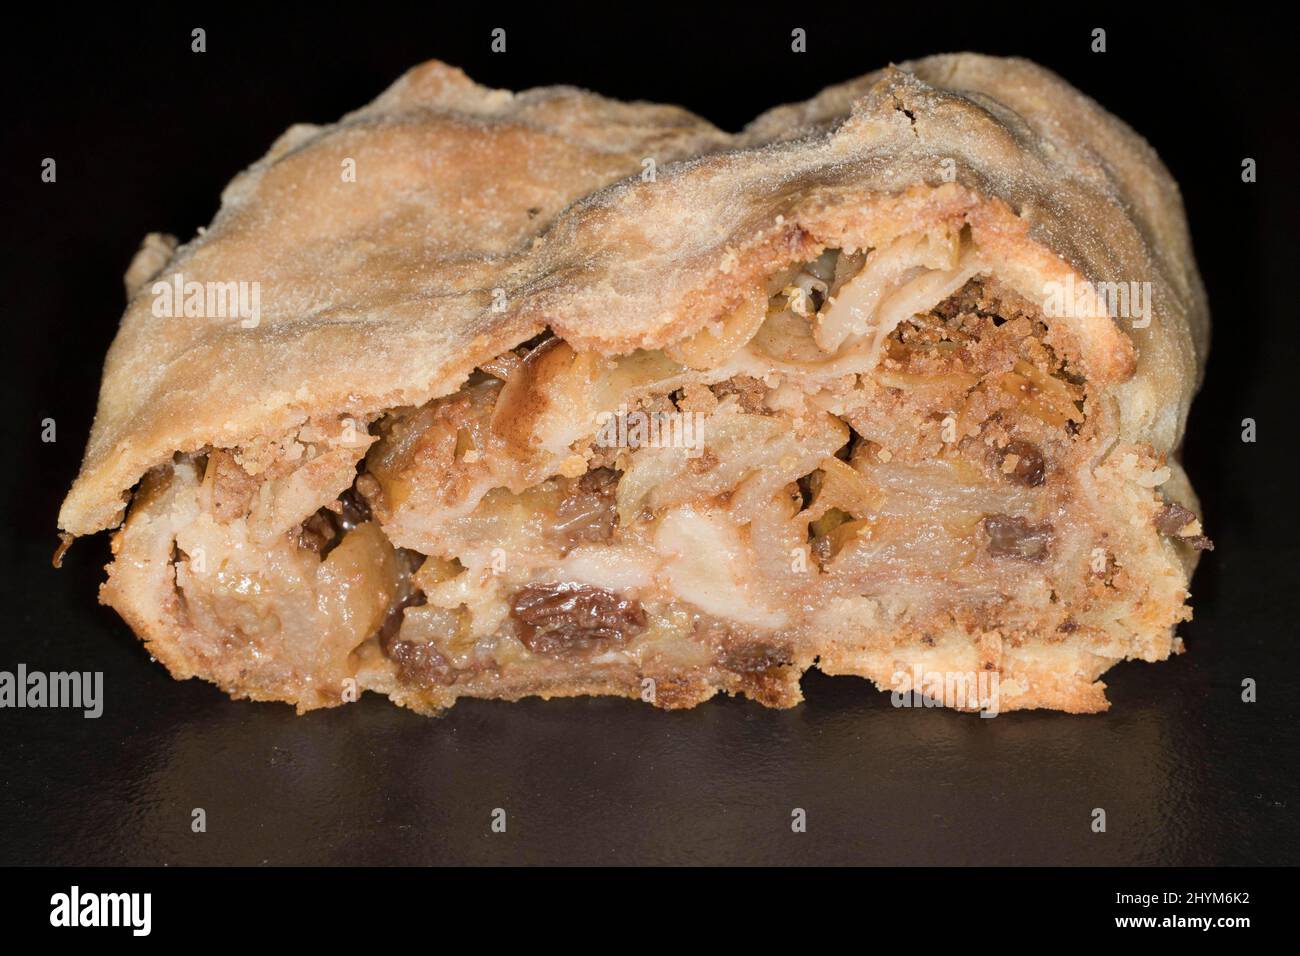 Apple strudel with sultanas, studio photography with black background Stock Photo